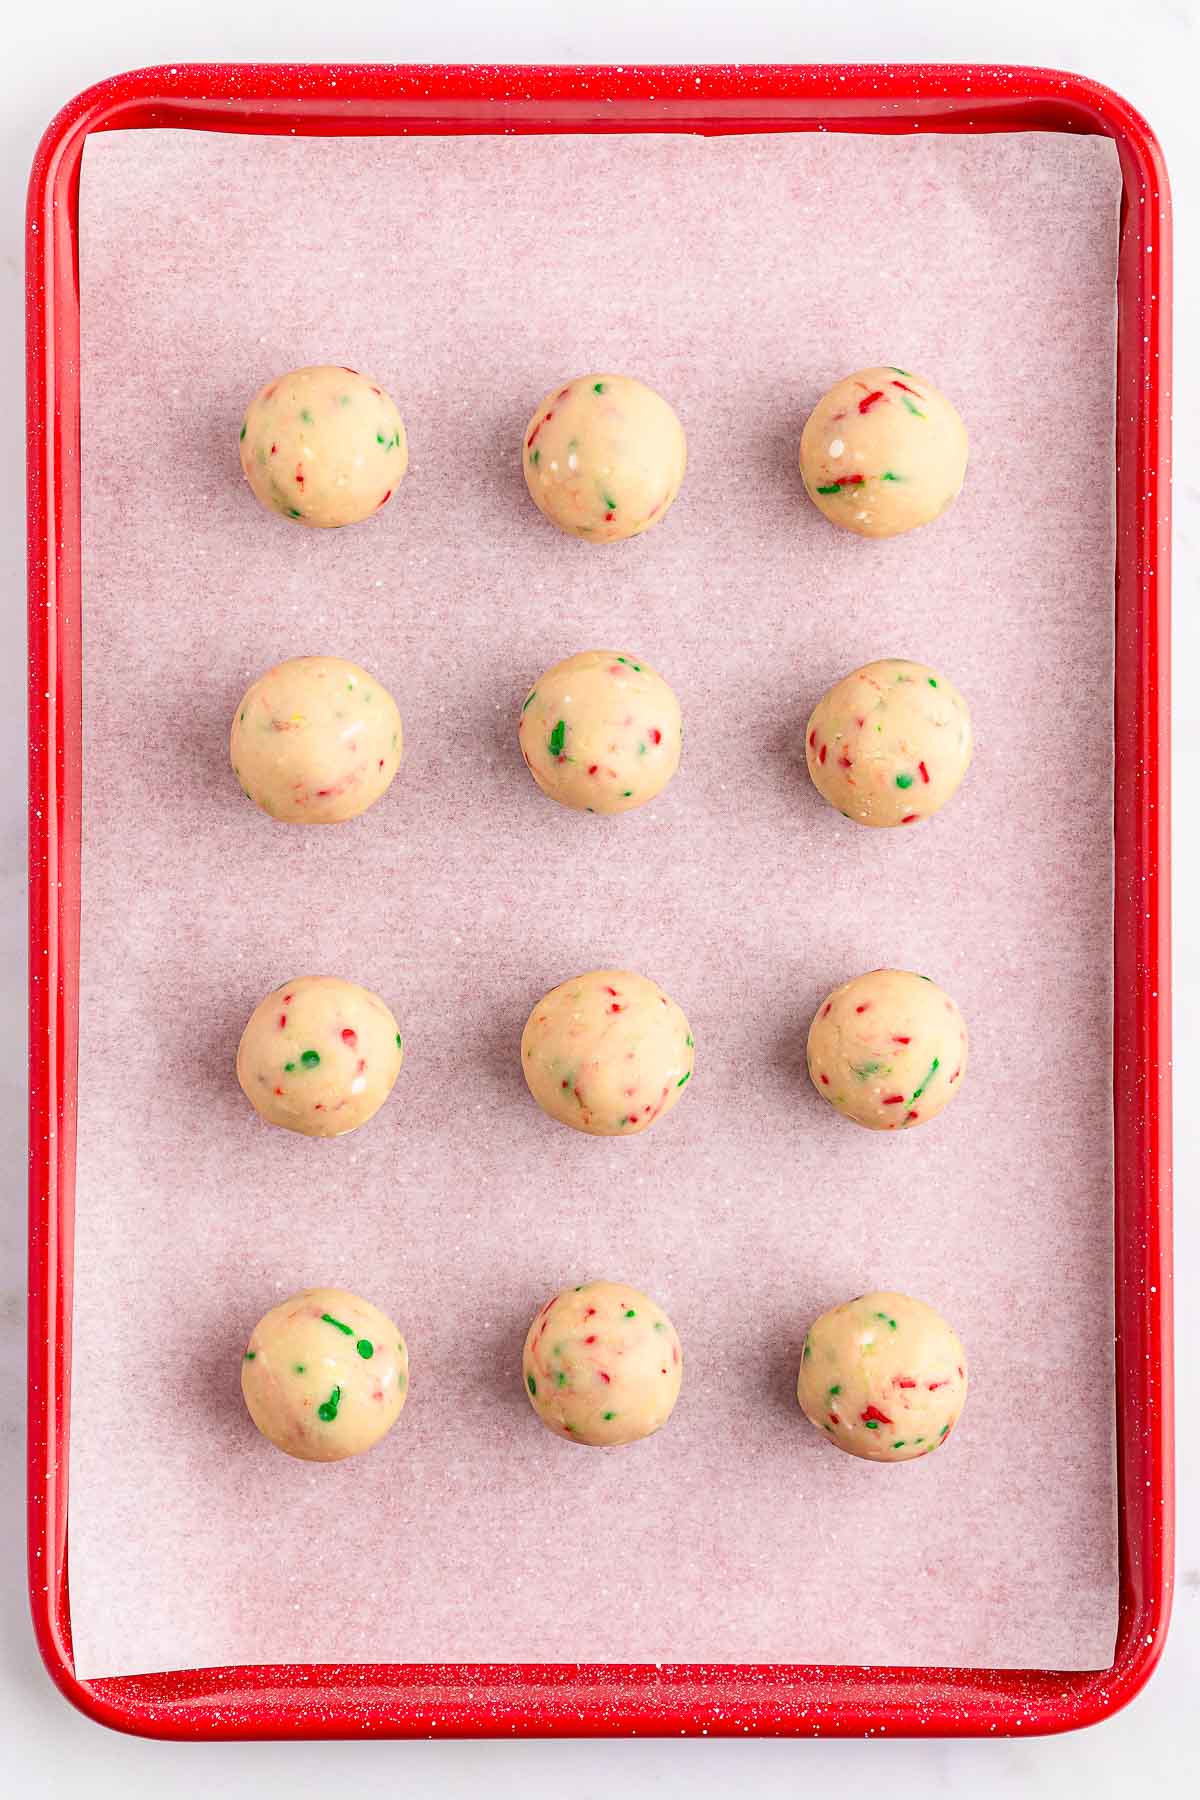 A tray lined with sugar cookie dough balls.